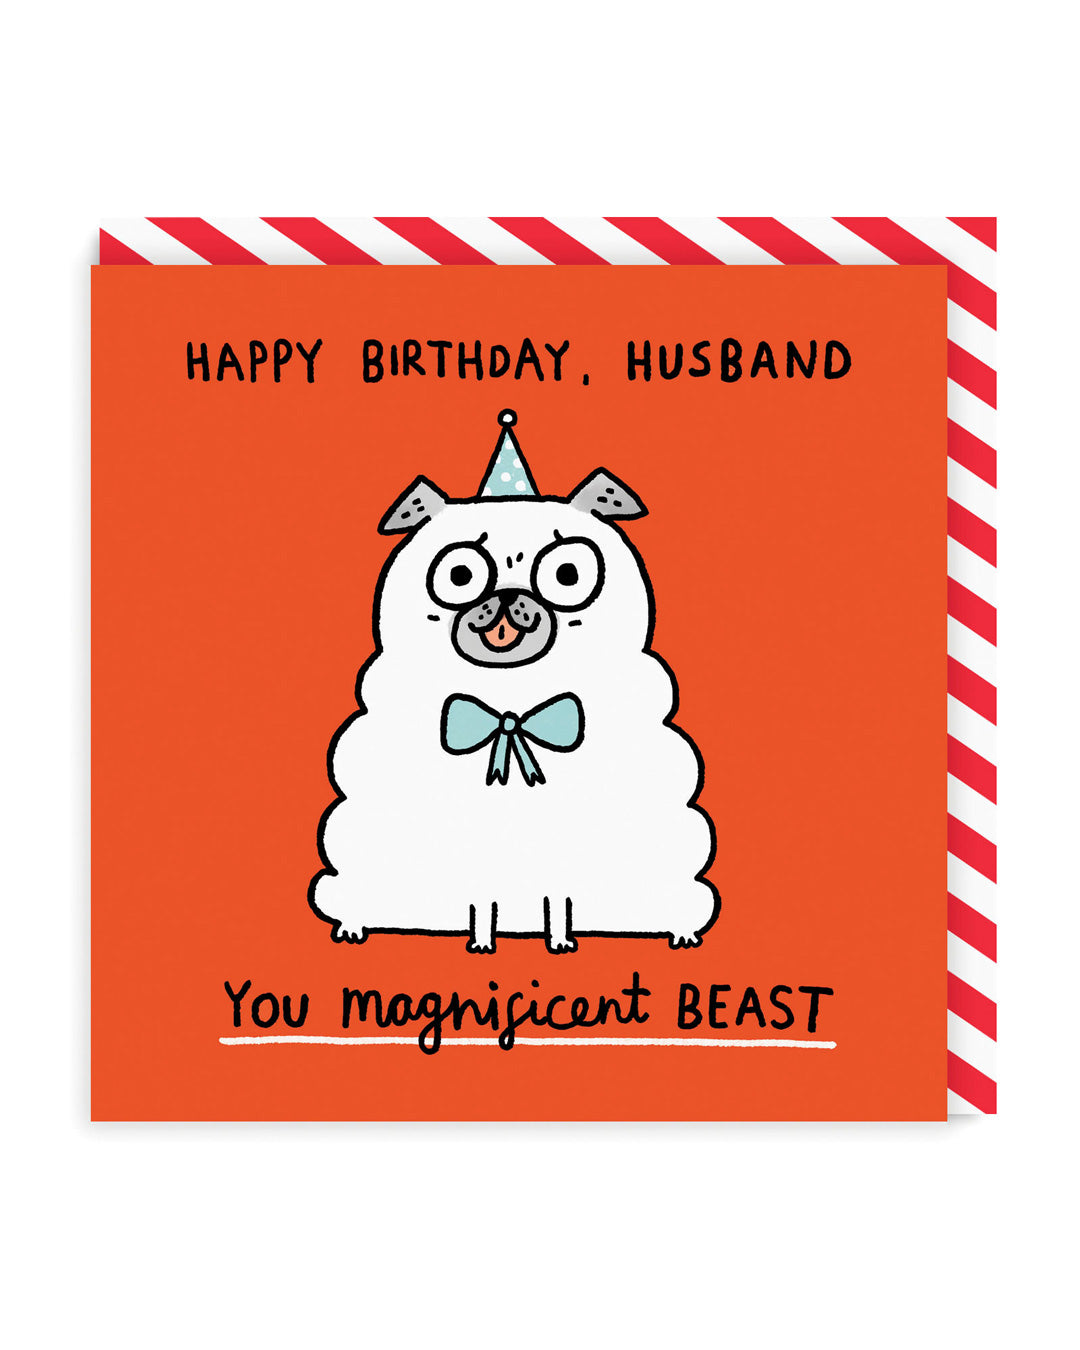 Husband Magnificent Beast Square Birthday Greeting Card